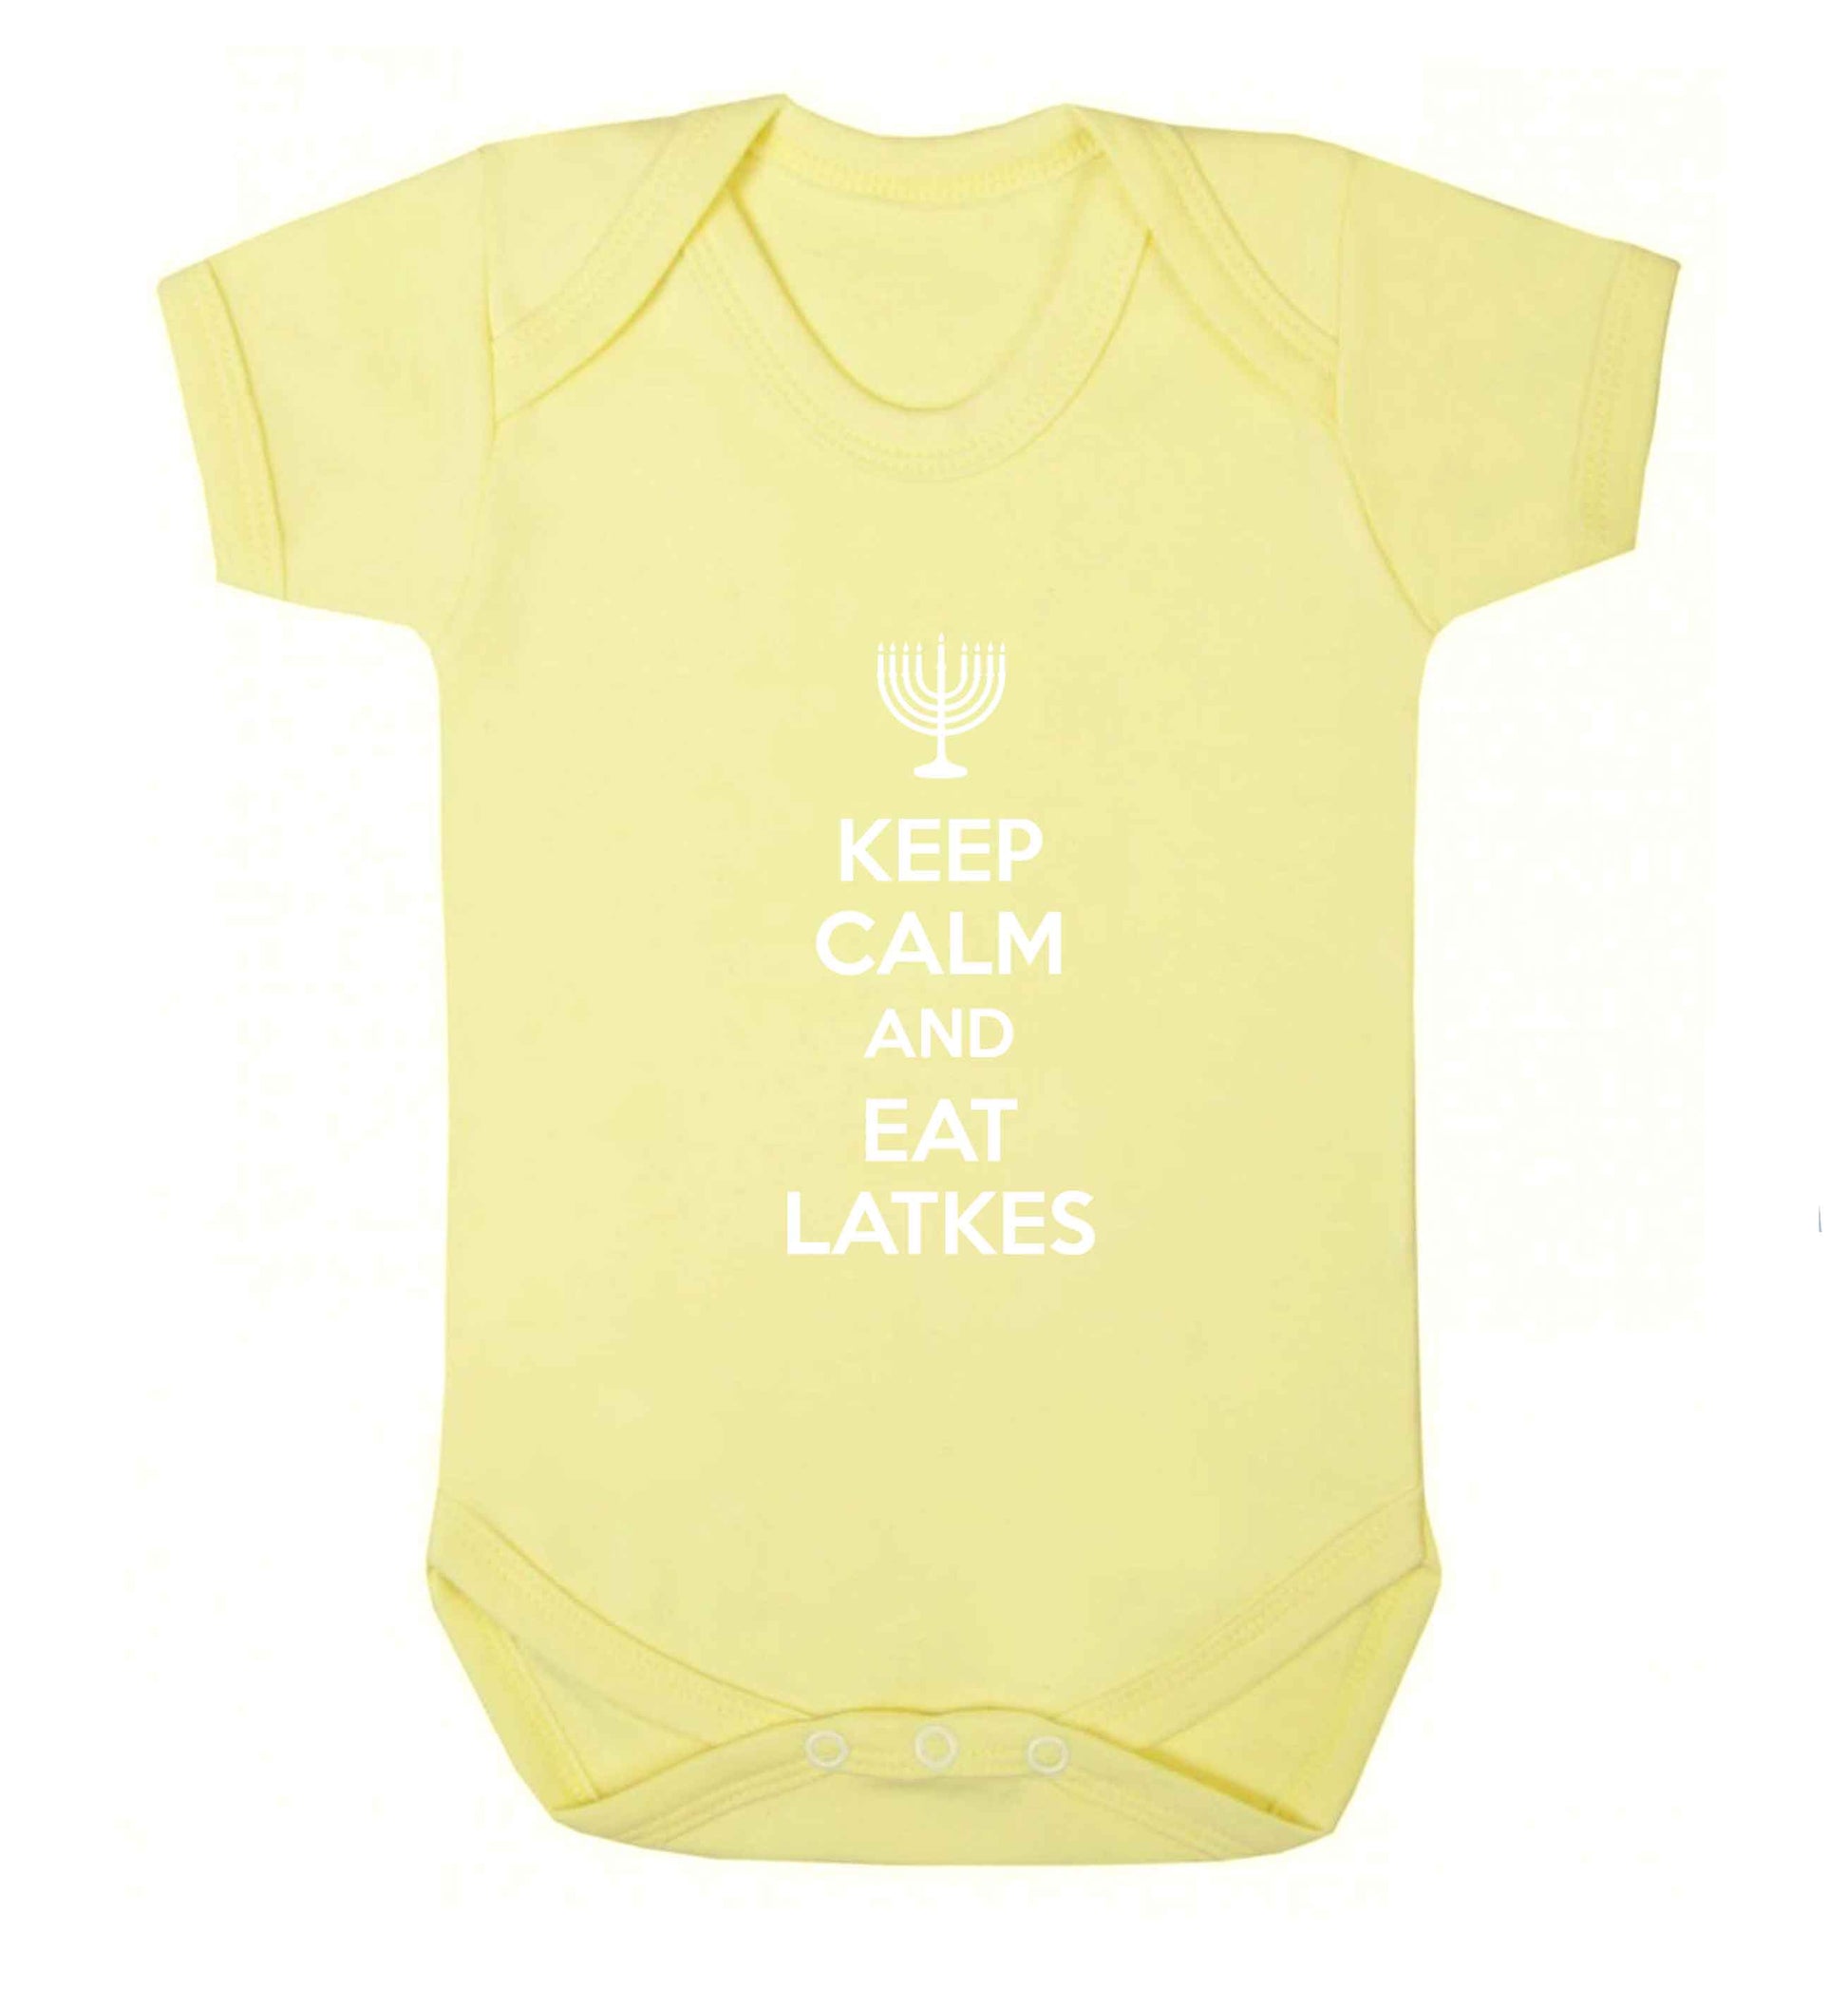 Keep calm and eat latkes baby vest pale yellow 18-24 months